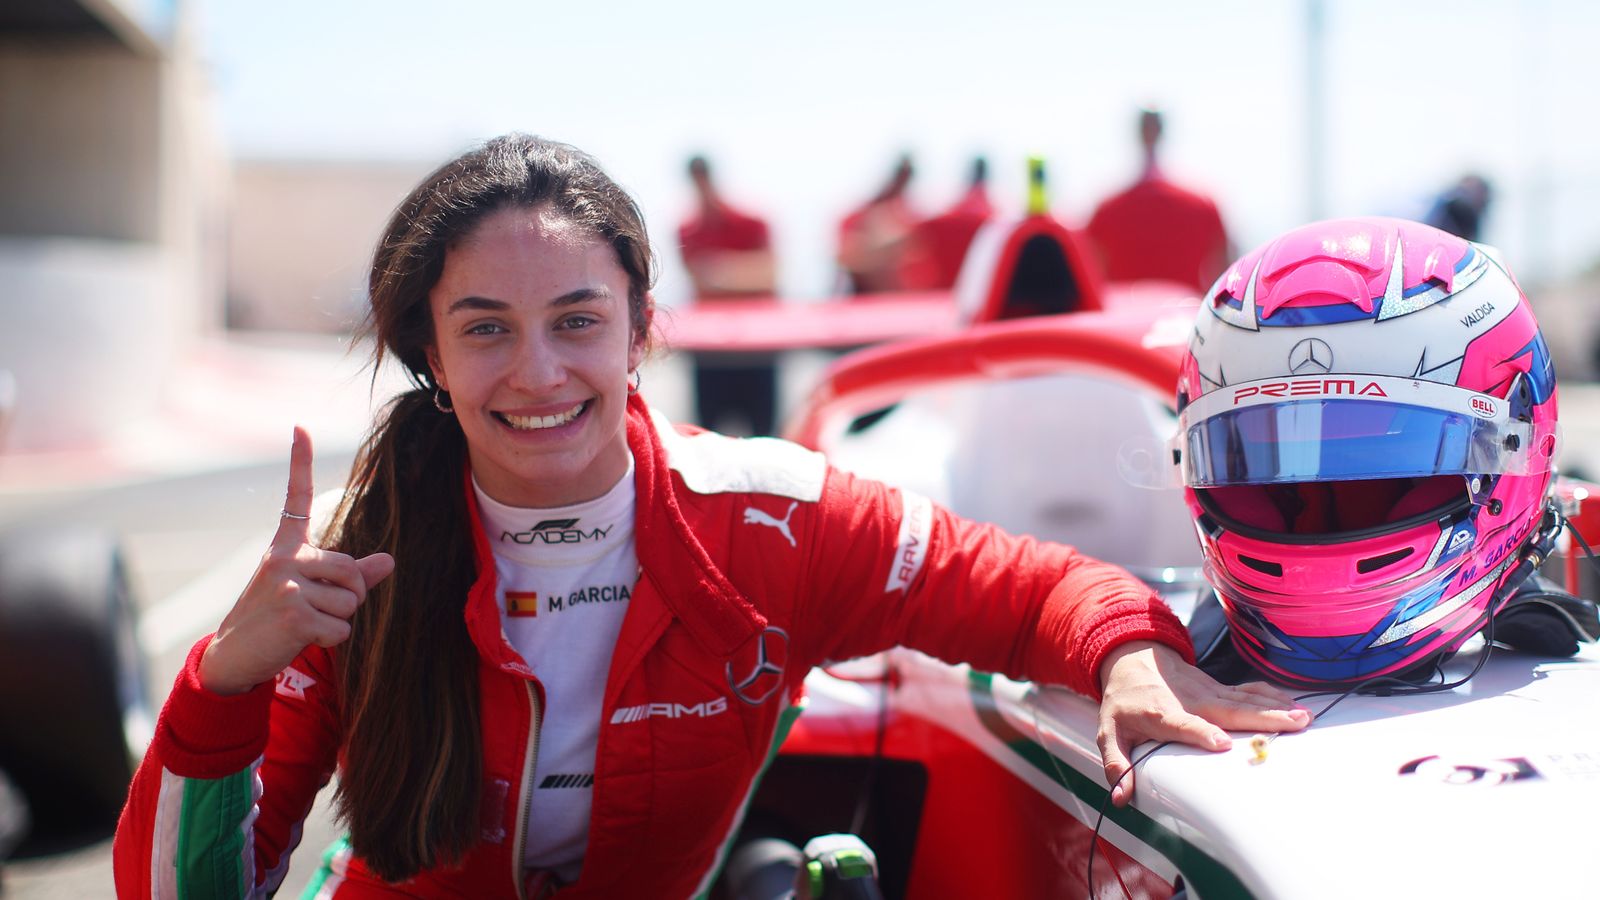 Marta Garcia on her journey to reach F1: 'Work, focus and just do it!'